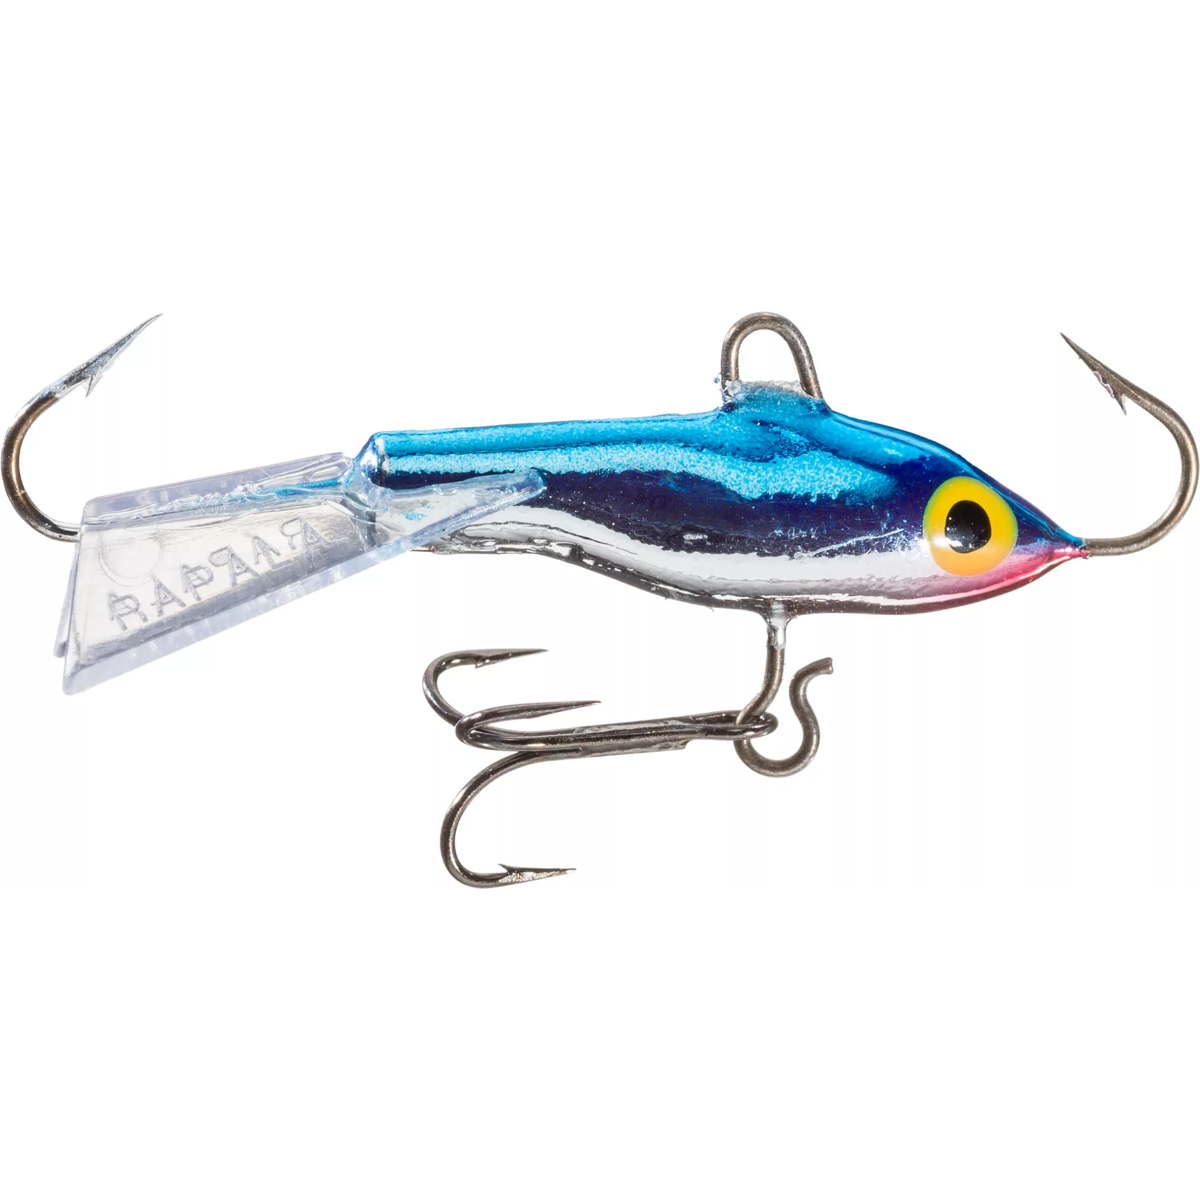 Photo of Rapala Jigging Rap for sale at United Tackle Shops.